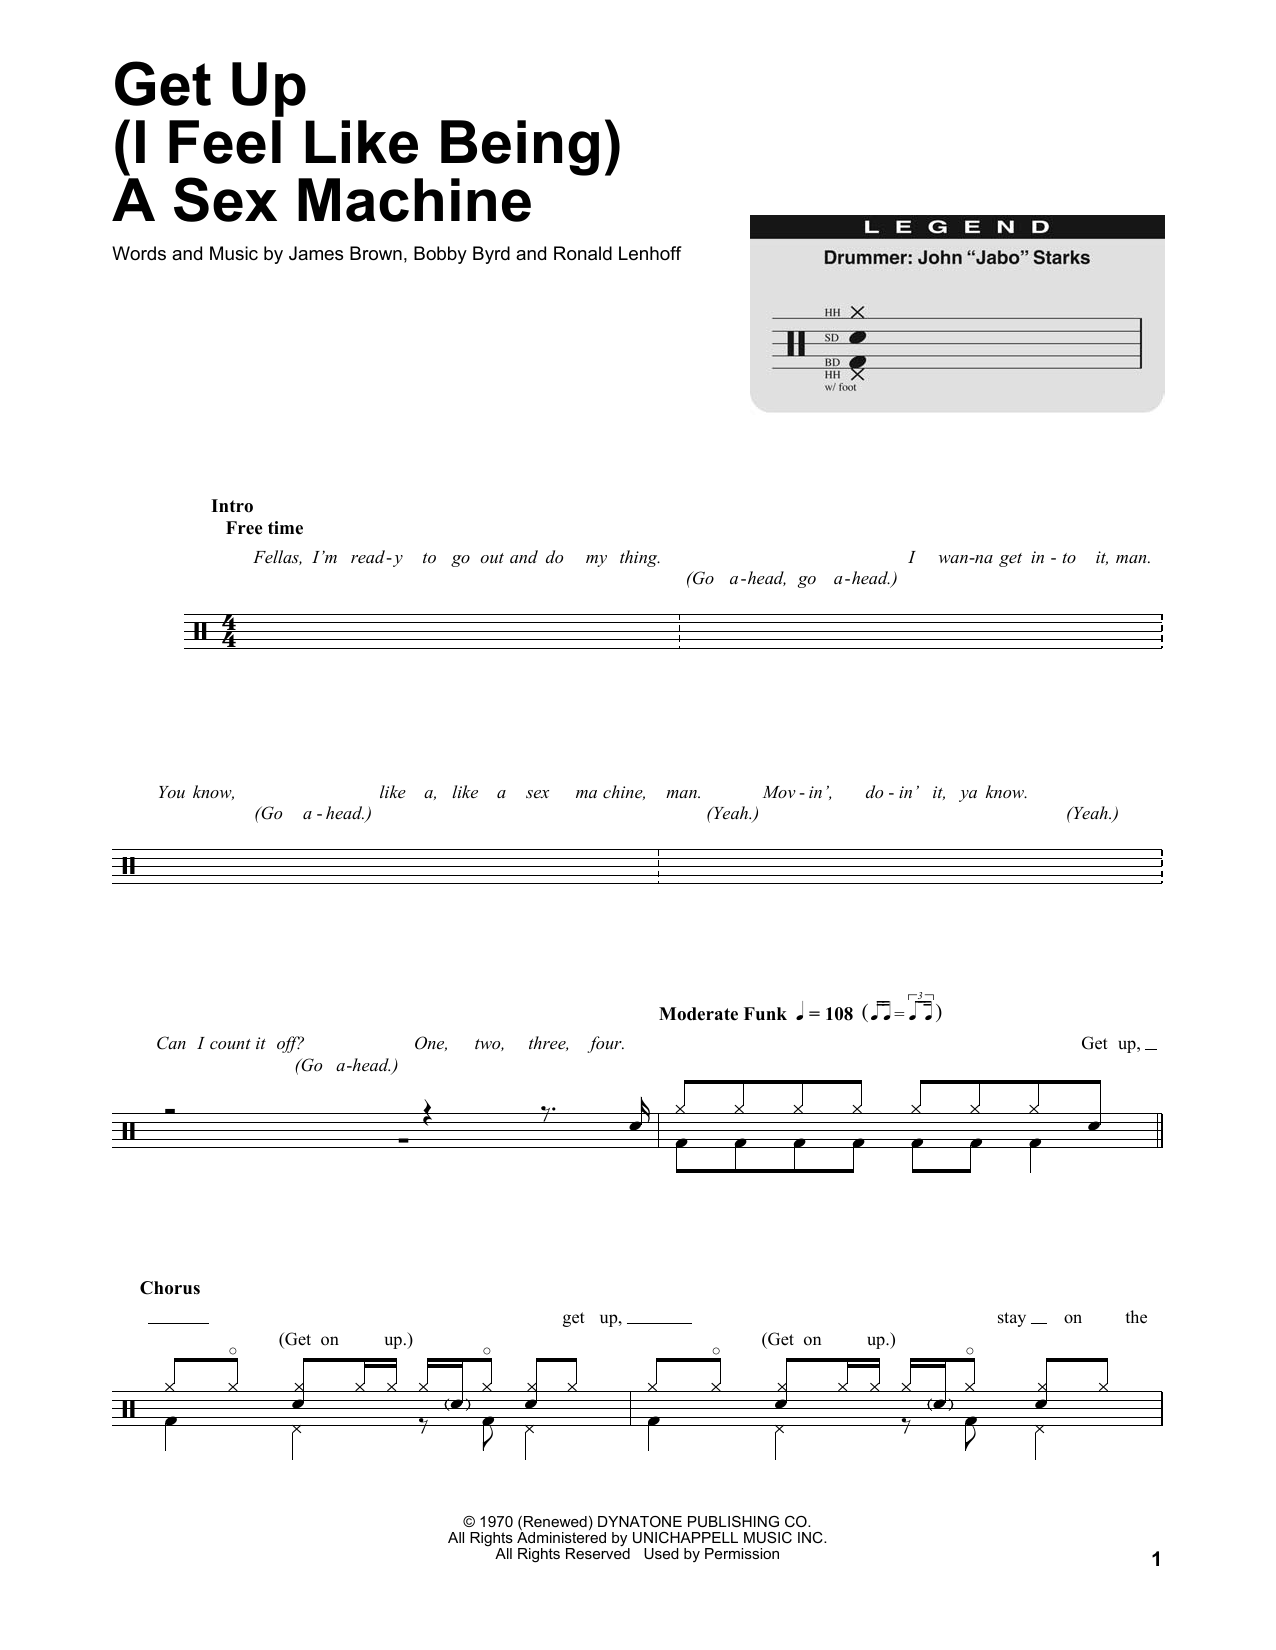 Download James Brown Get Up (I Feel Like Being A Sex Machine Sheet Music